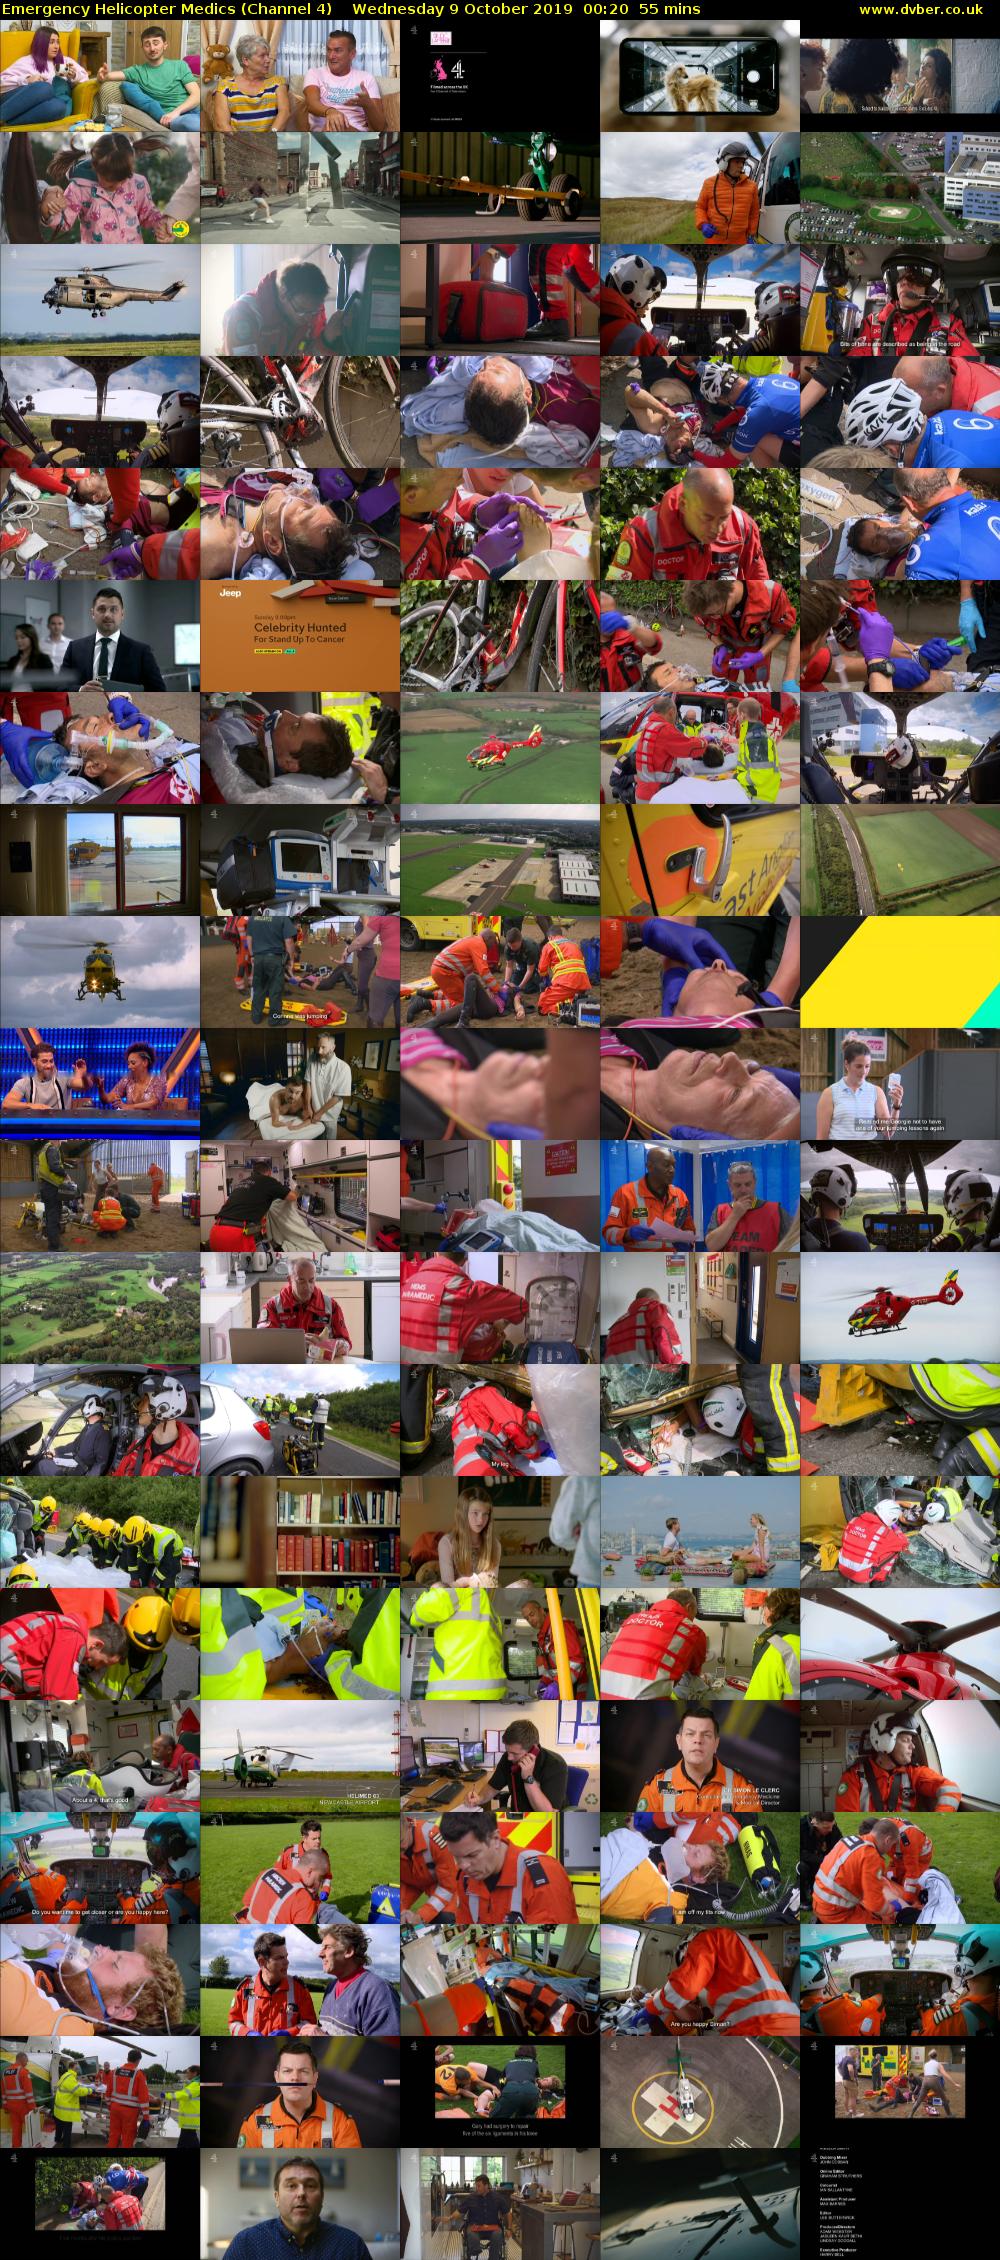 Emergency Helicopter Medics (Channel 4) Wednesday 9 October 2019 00:20 - 01:15